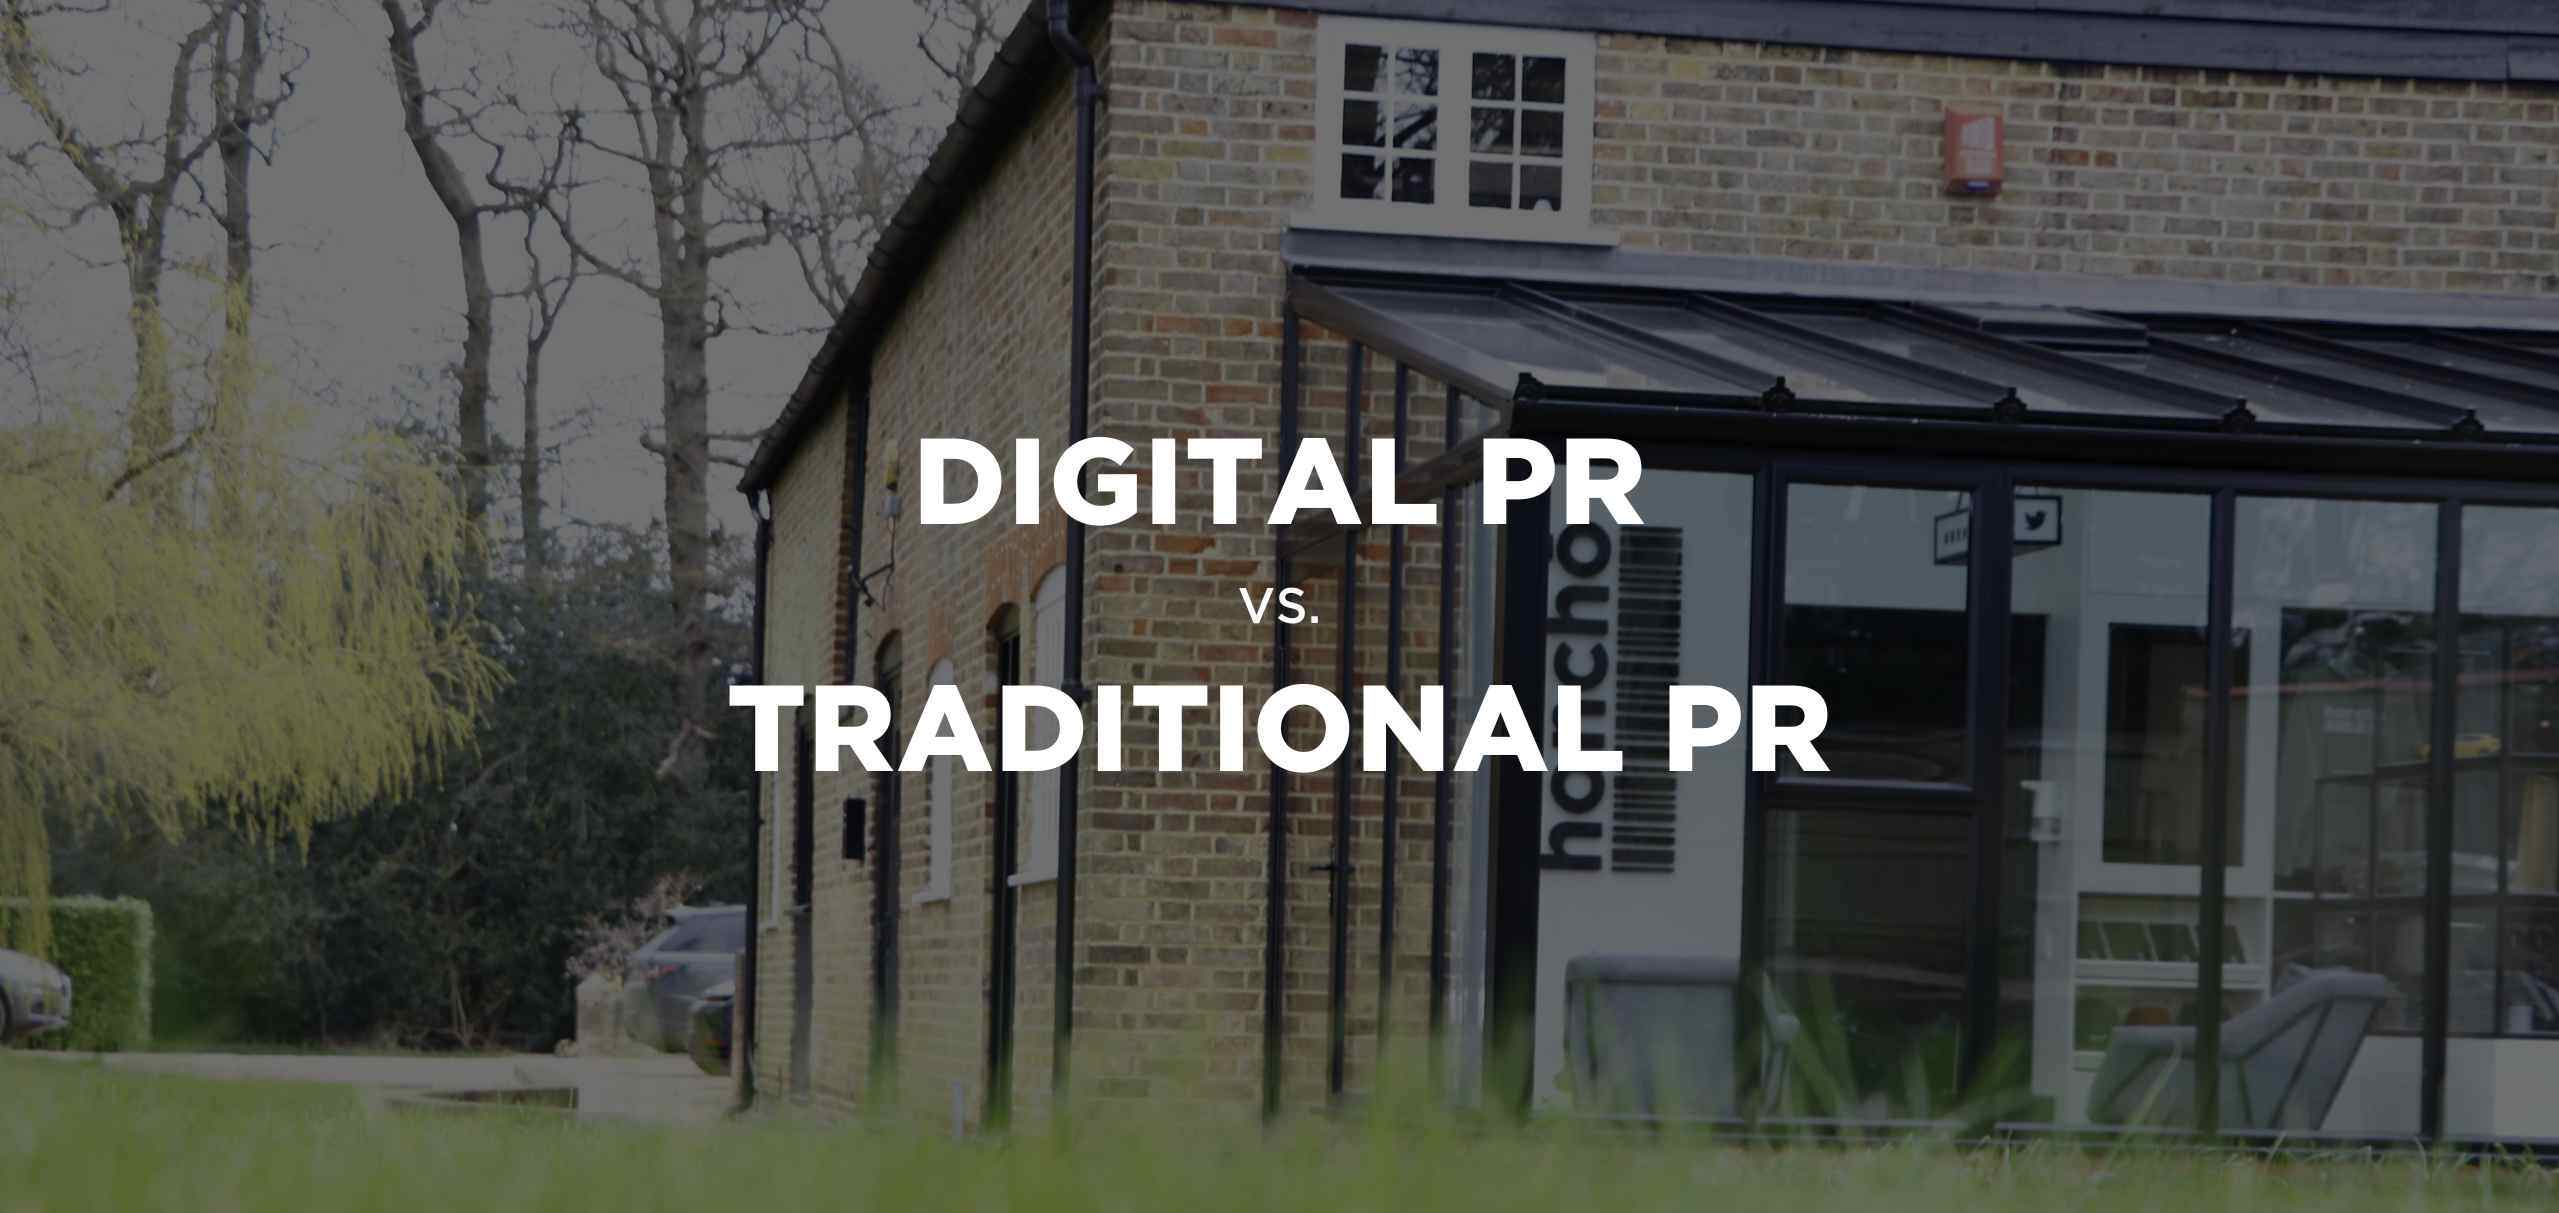 Traditional PR vs Digital PR: Which is More Effective?